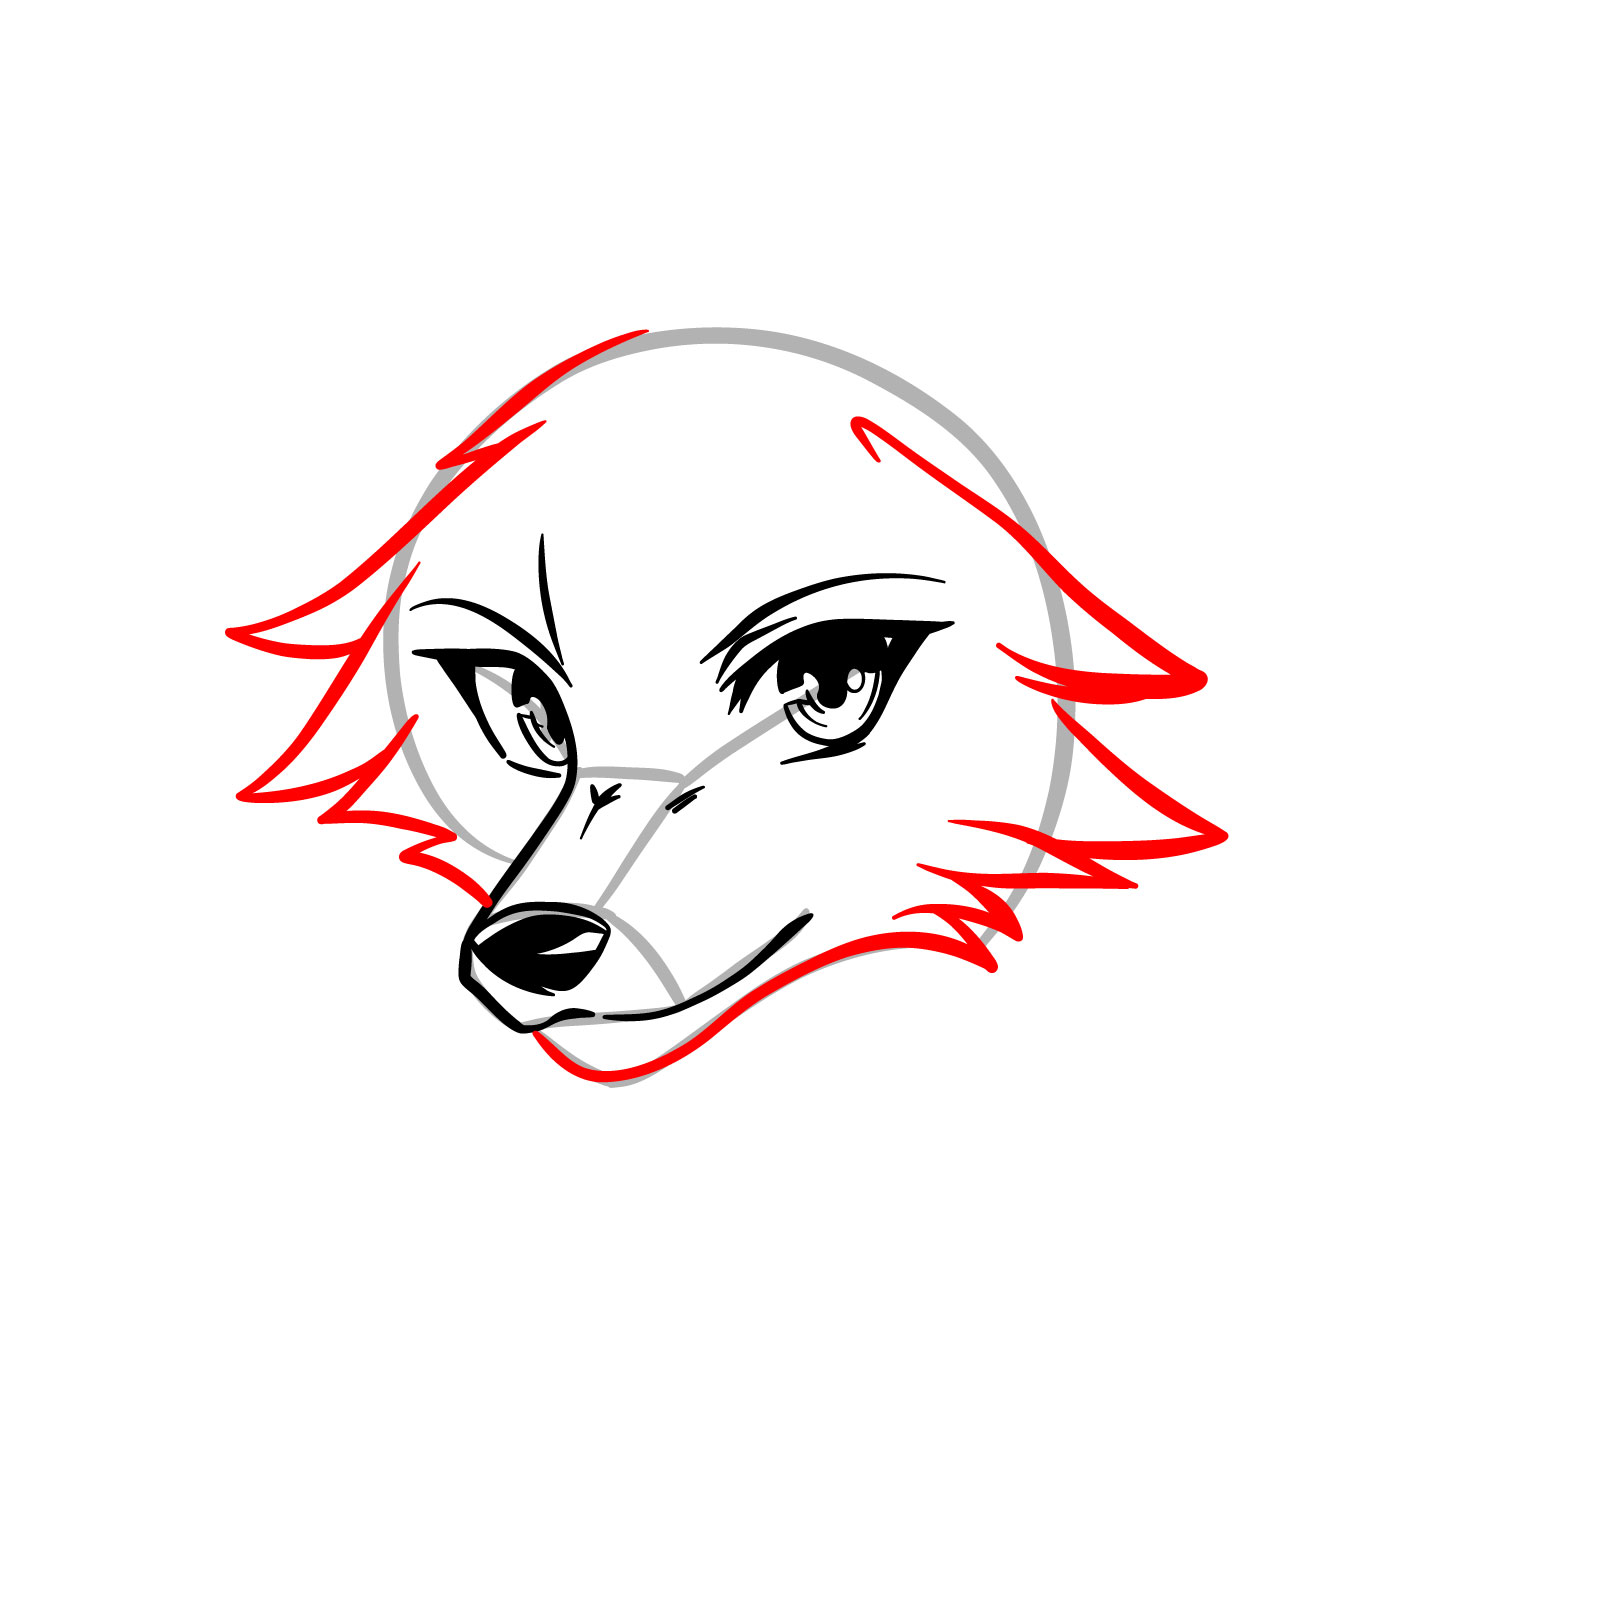 Next step in an anime wolf face drawing, adding the furry texture - step 06